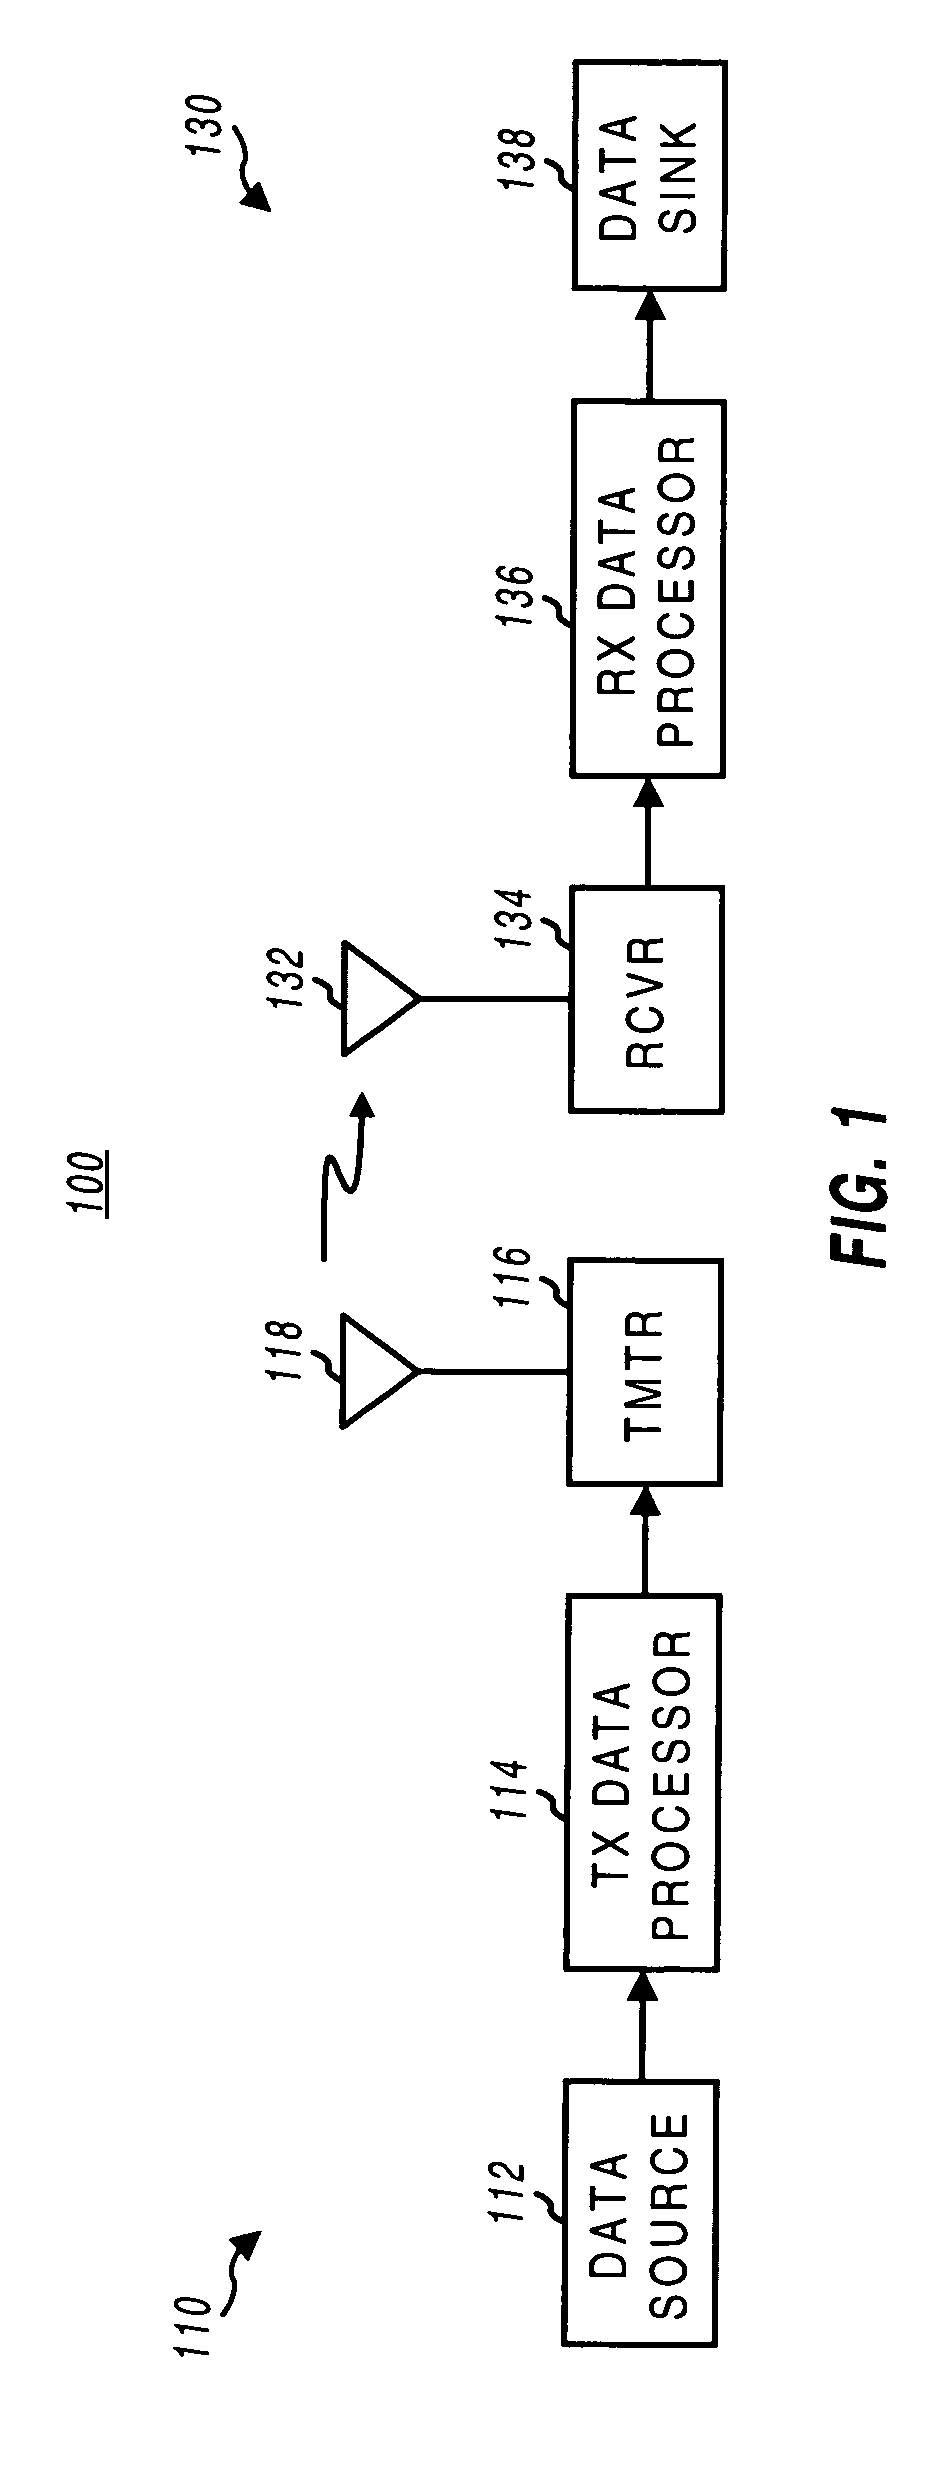 Data buffer structure for physical and transport channels in a CDMA system